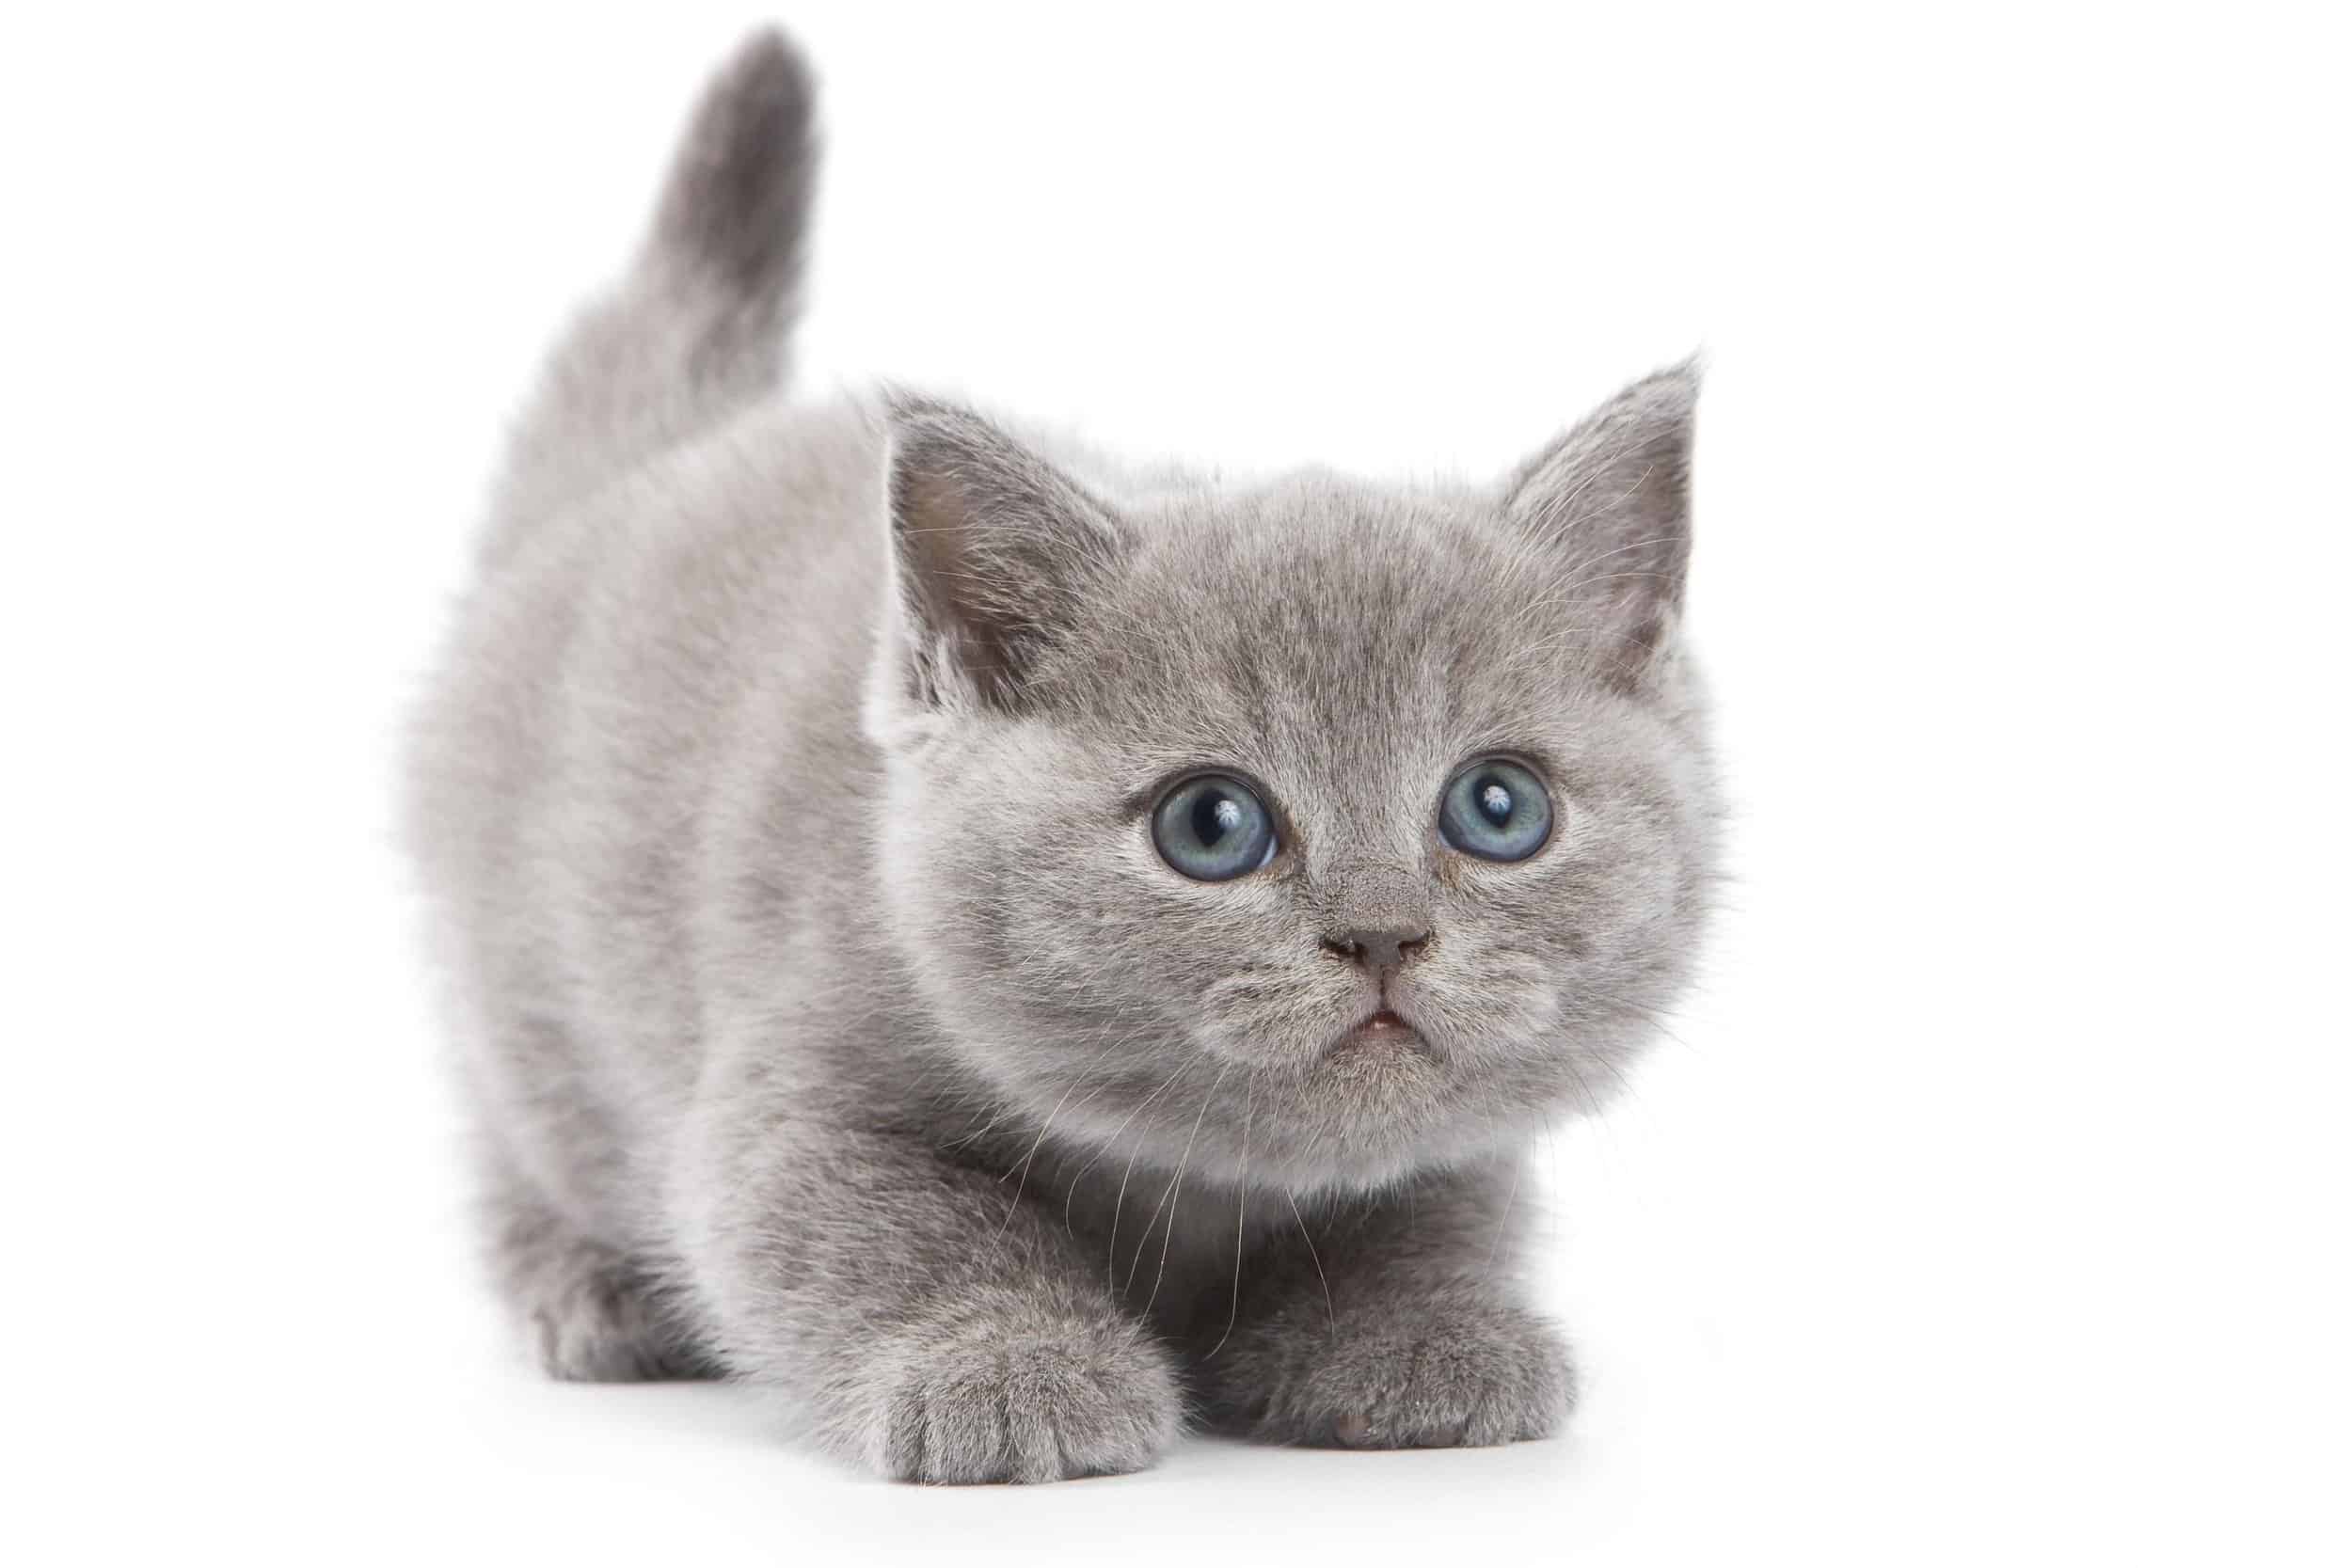 British Shorthair cats are considered to be fairly healthy.